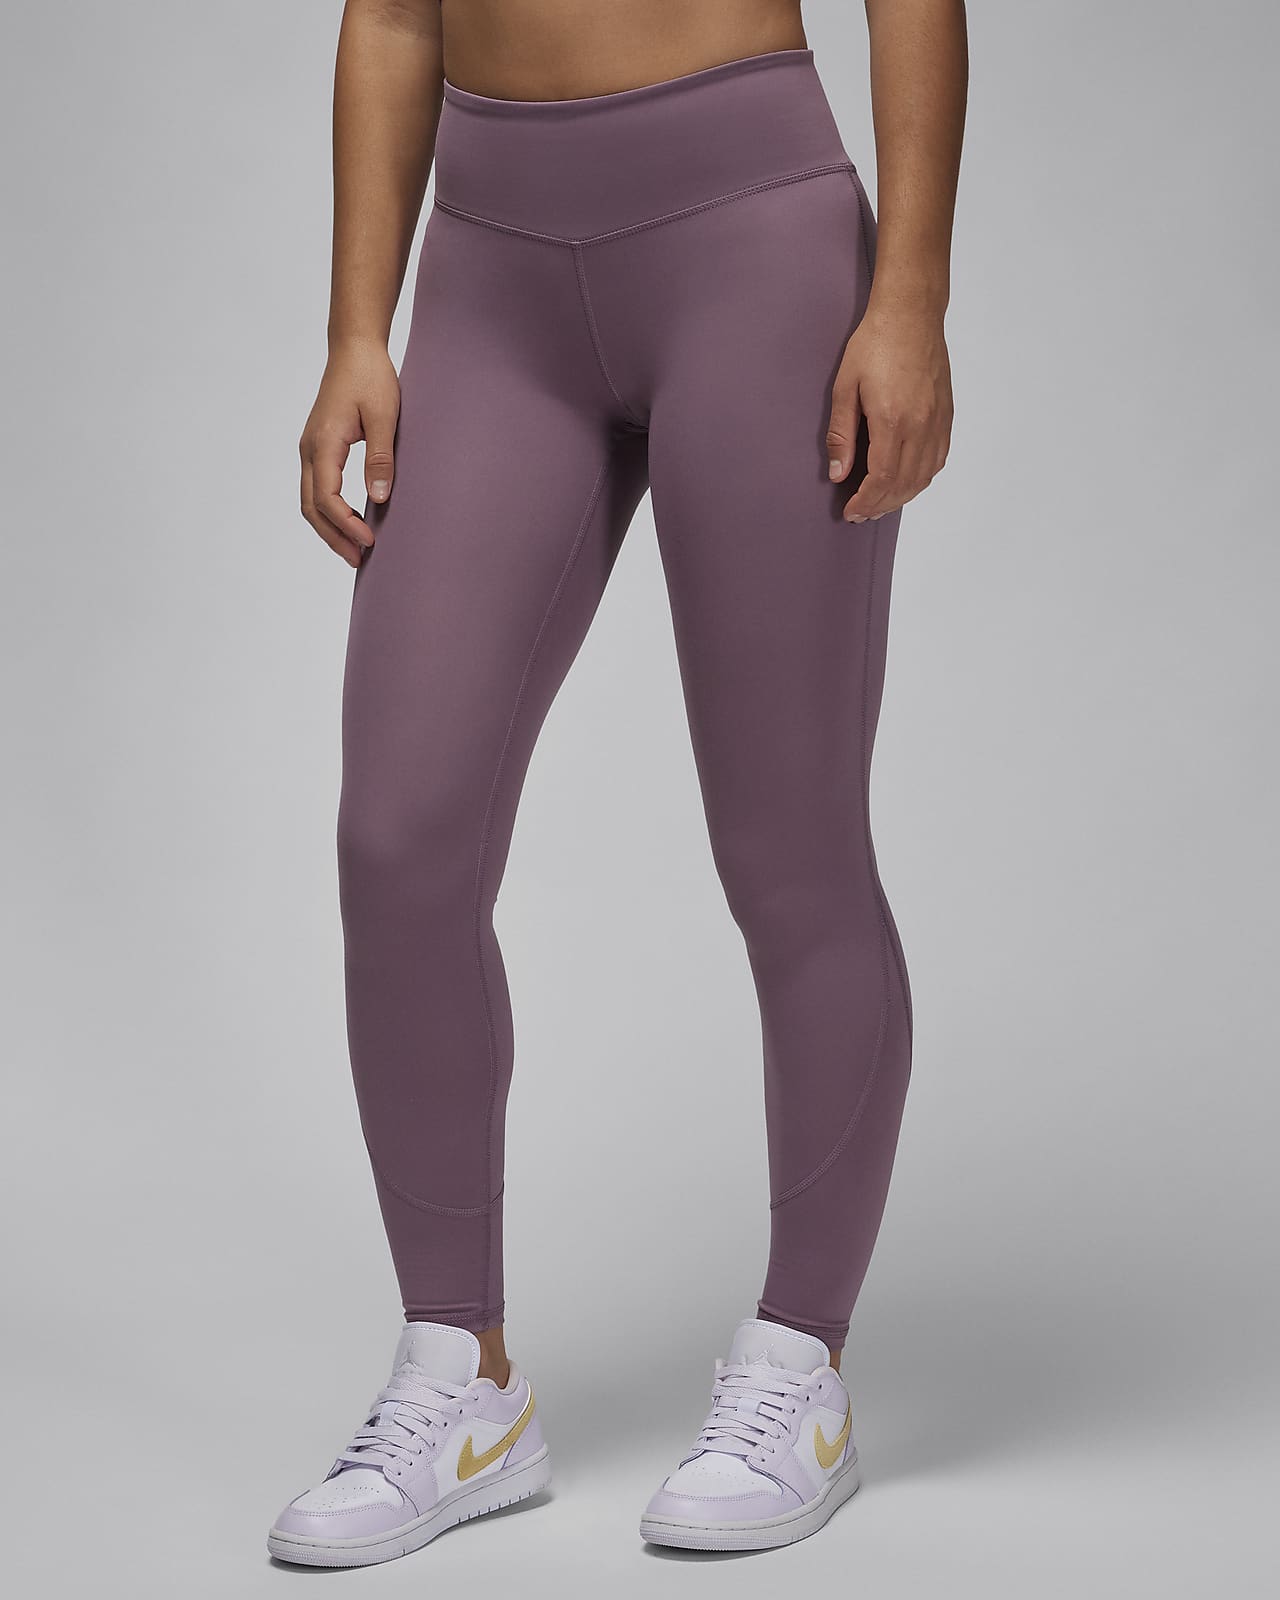 Women's Leggings and Tights, Sports, Fashion